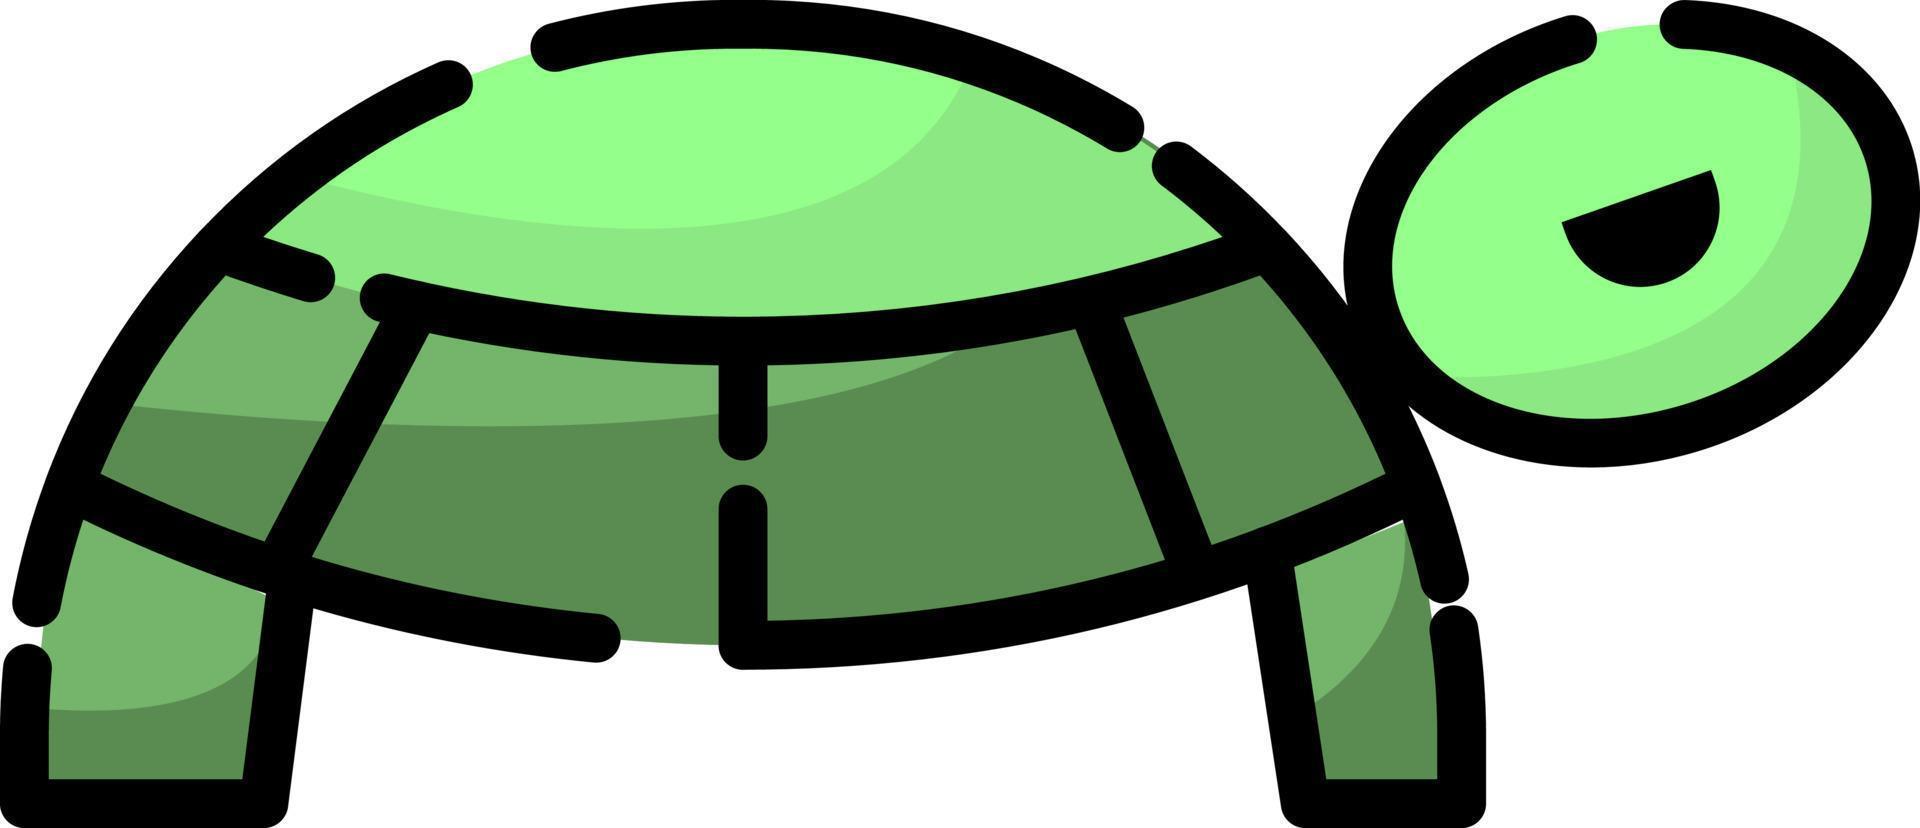 Green turtle, illustration, vector on a white background.